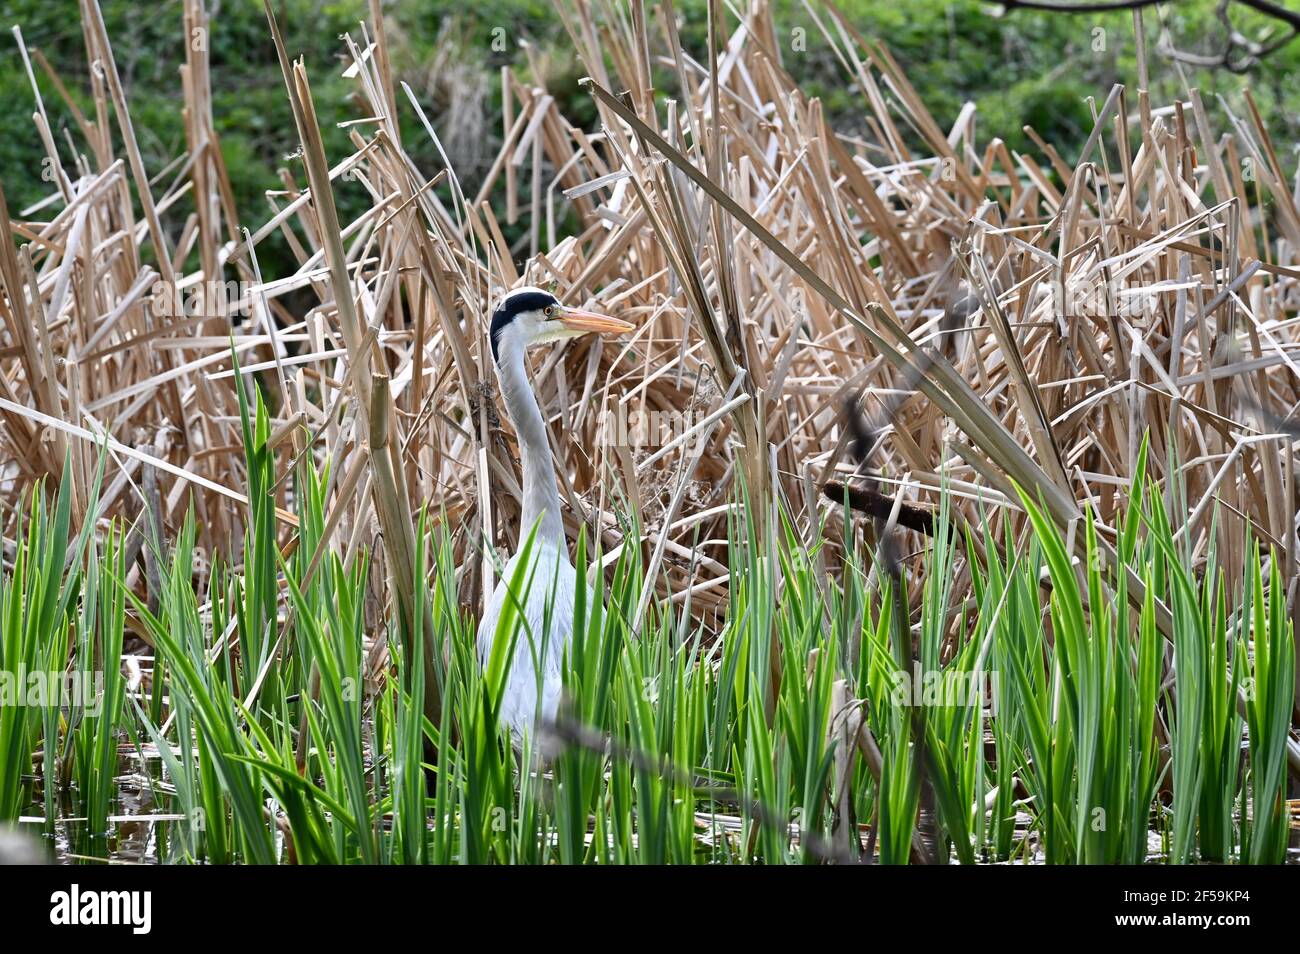 UK Weather. Sidcup, Kent. 25th Mar 2021. UK. On a Spring like day with very changable weather, a heron (Ardea cinerea) hides in the rushes and patiently awaits lunch. Foots Cray Meadows, Sidcup, Kent. UK Credit: michael melia/Alamy Live News Stock Photo